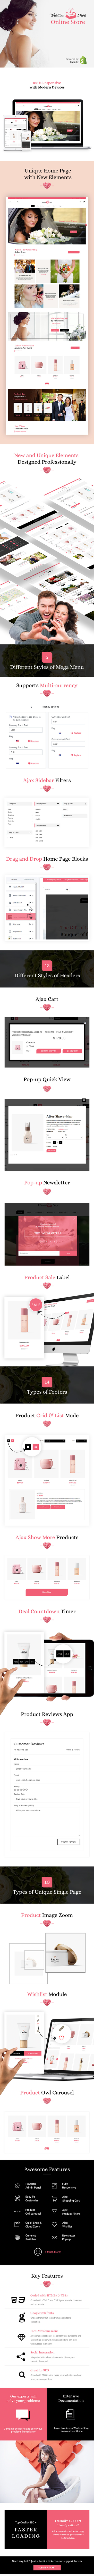 Window Shop - Wedding Shopify Theme features lists